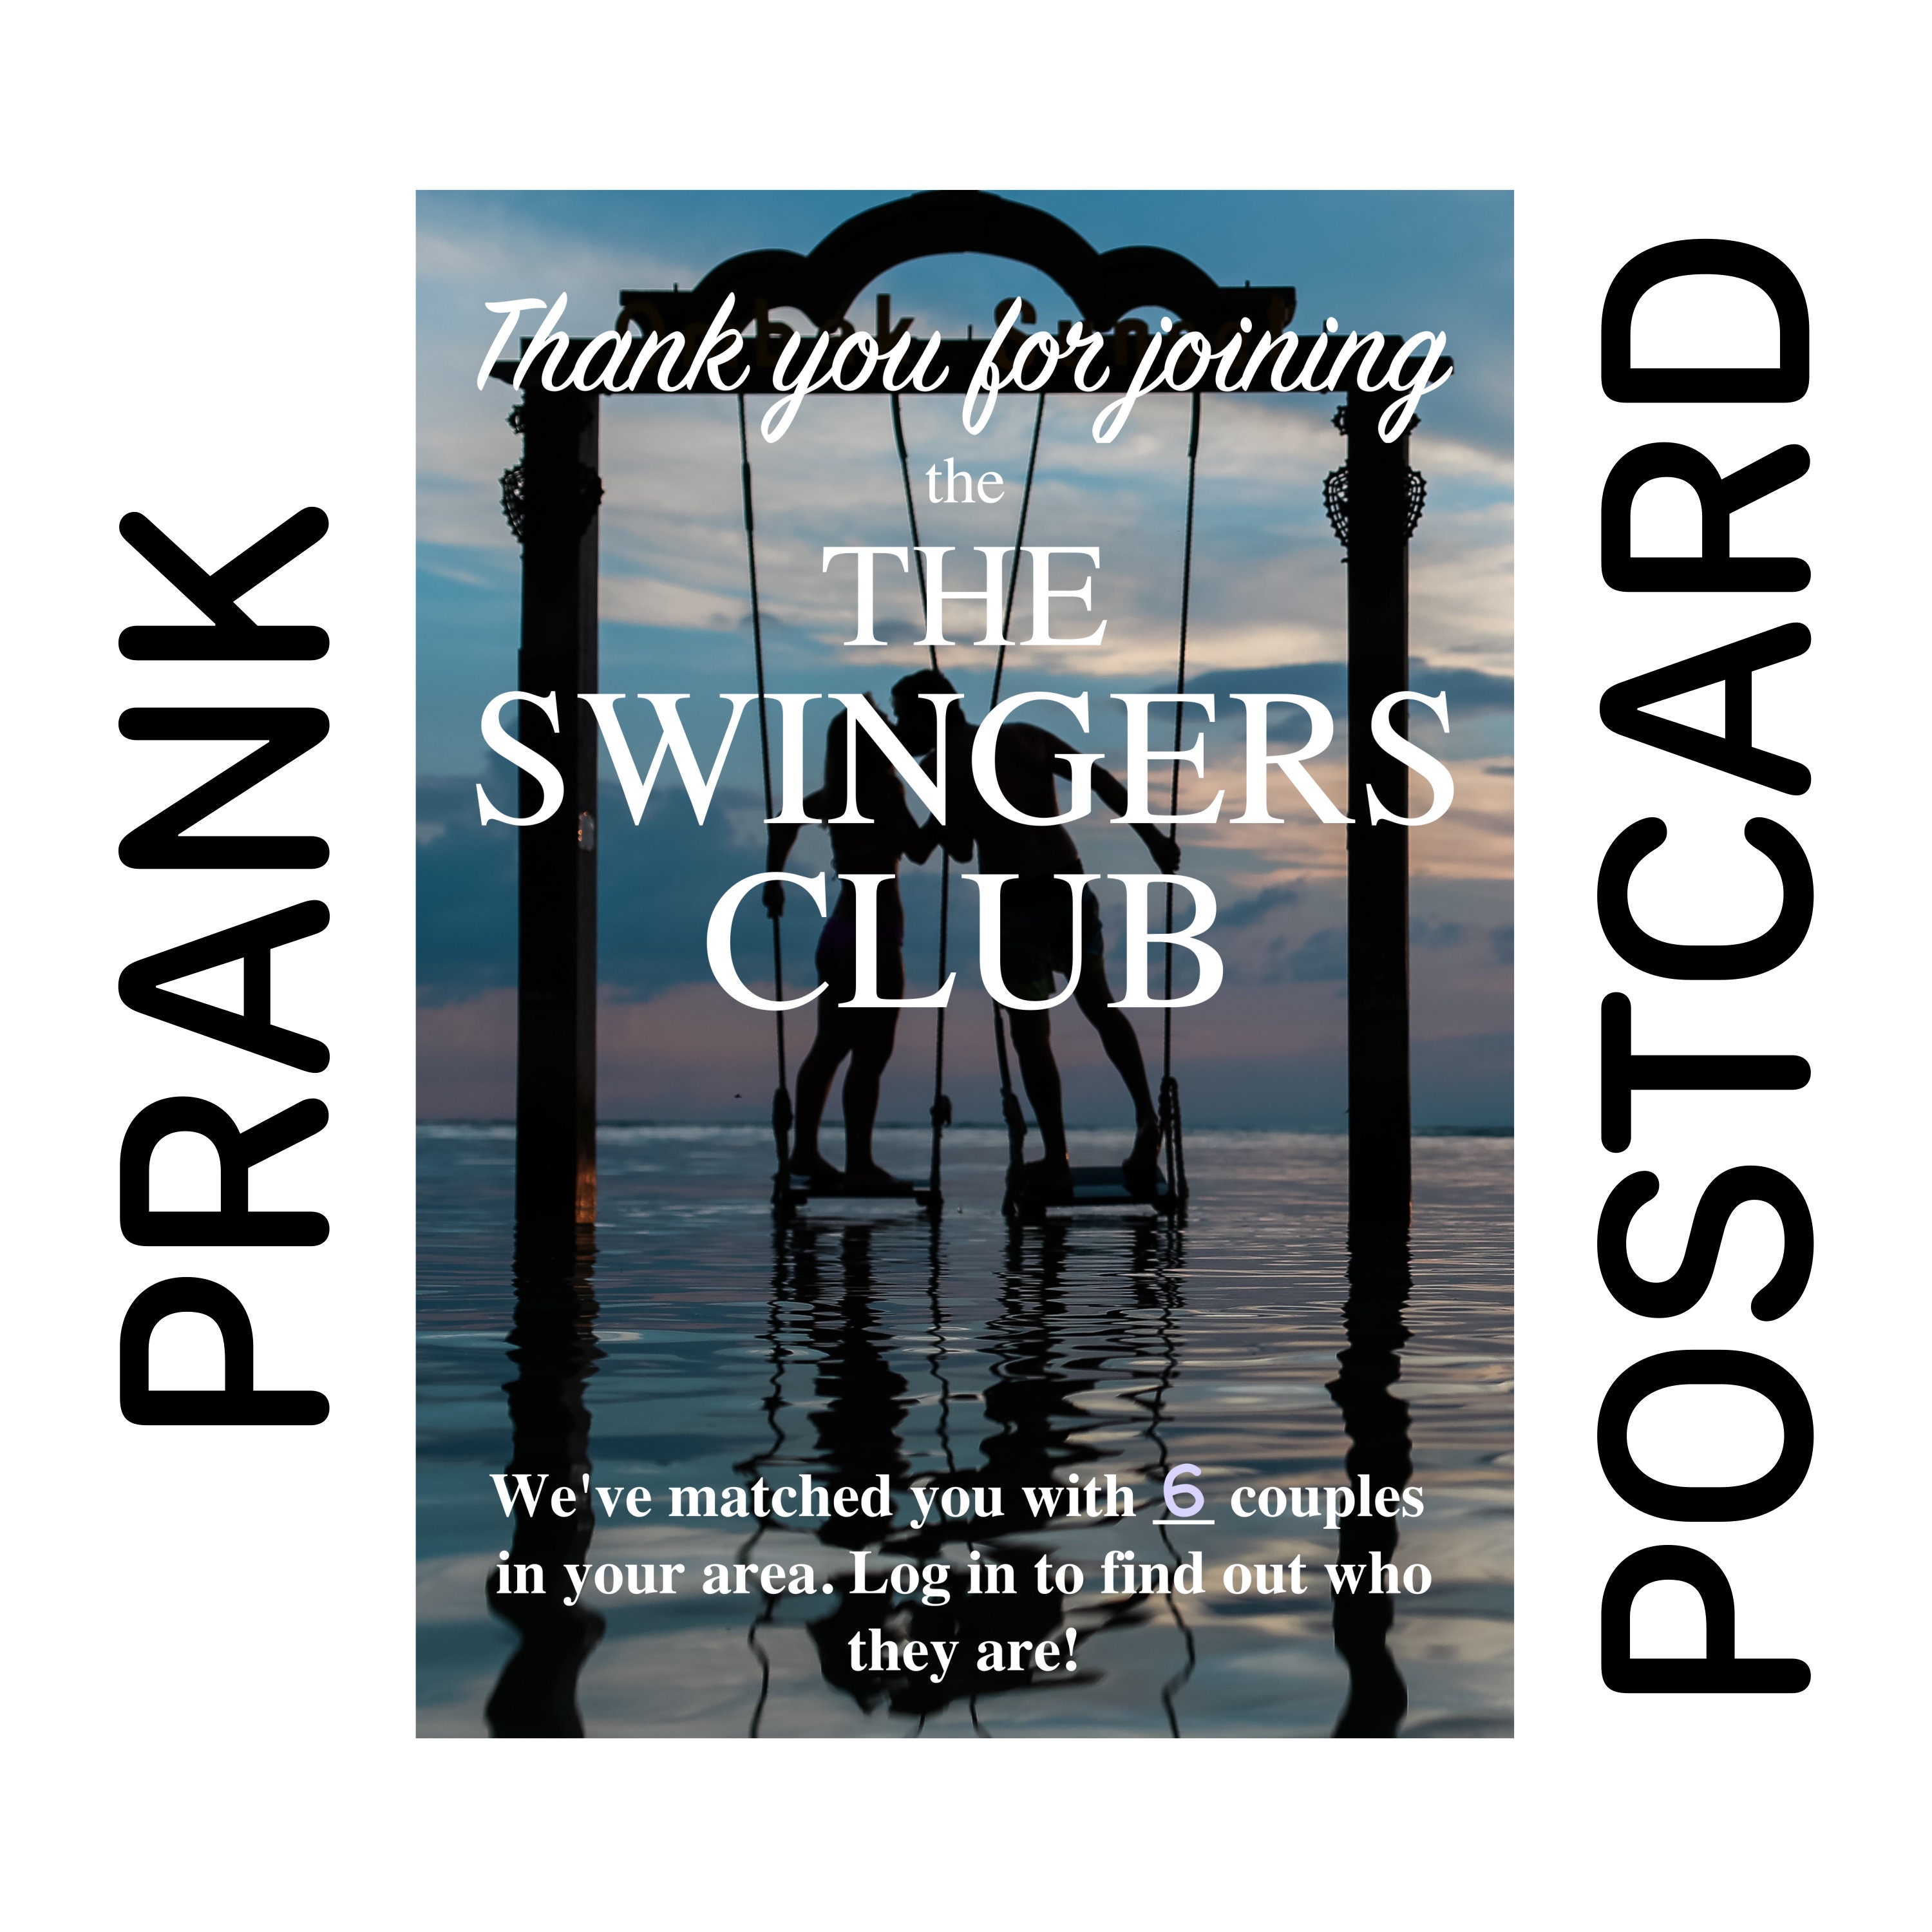 SWINGERS CLUB Gag Prank Mail Postcard Card Gift Funny picture